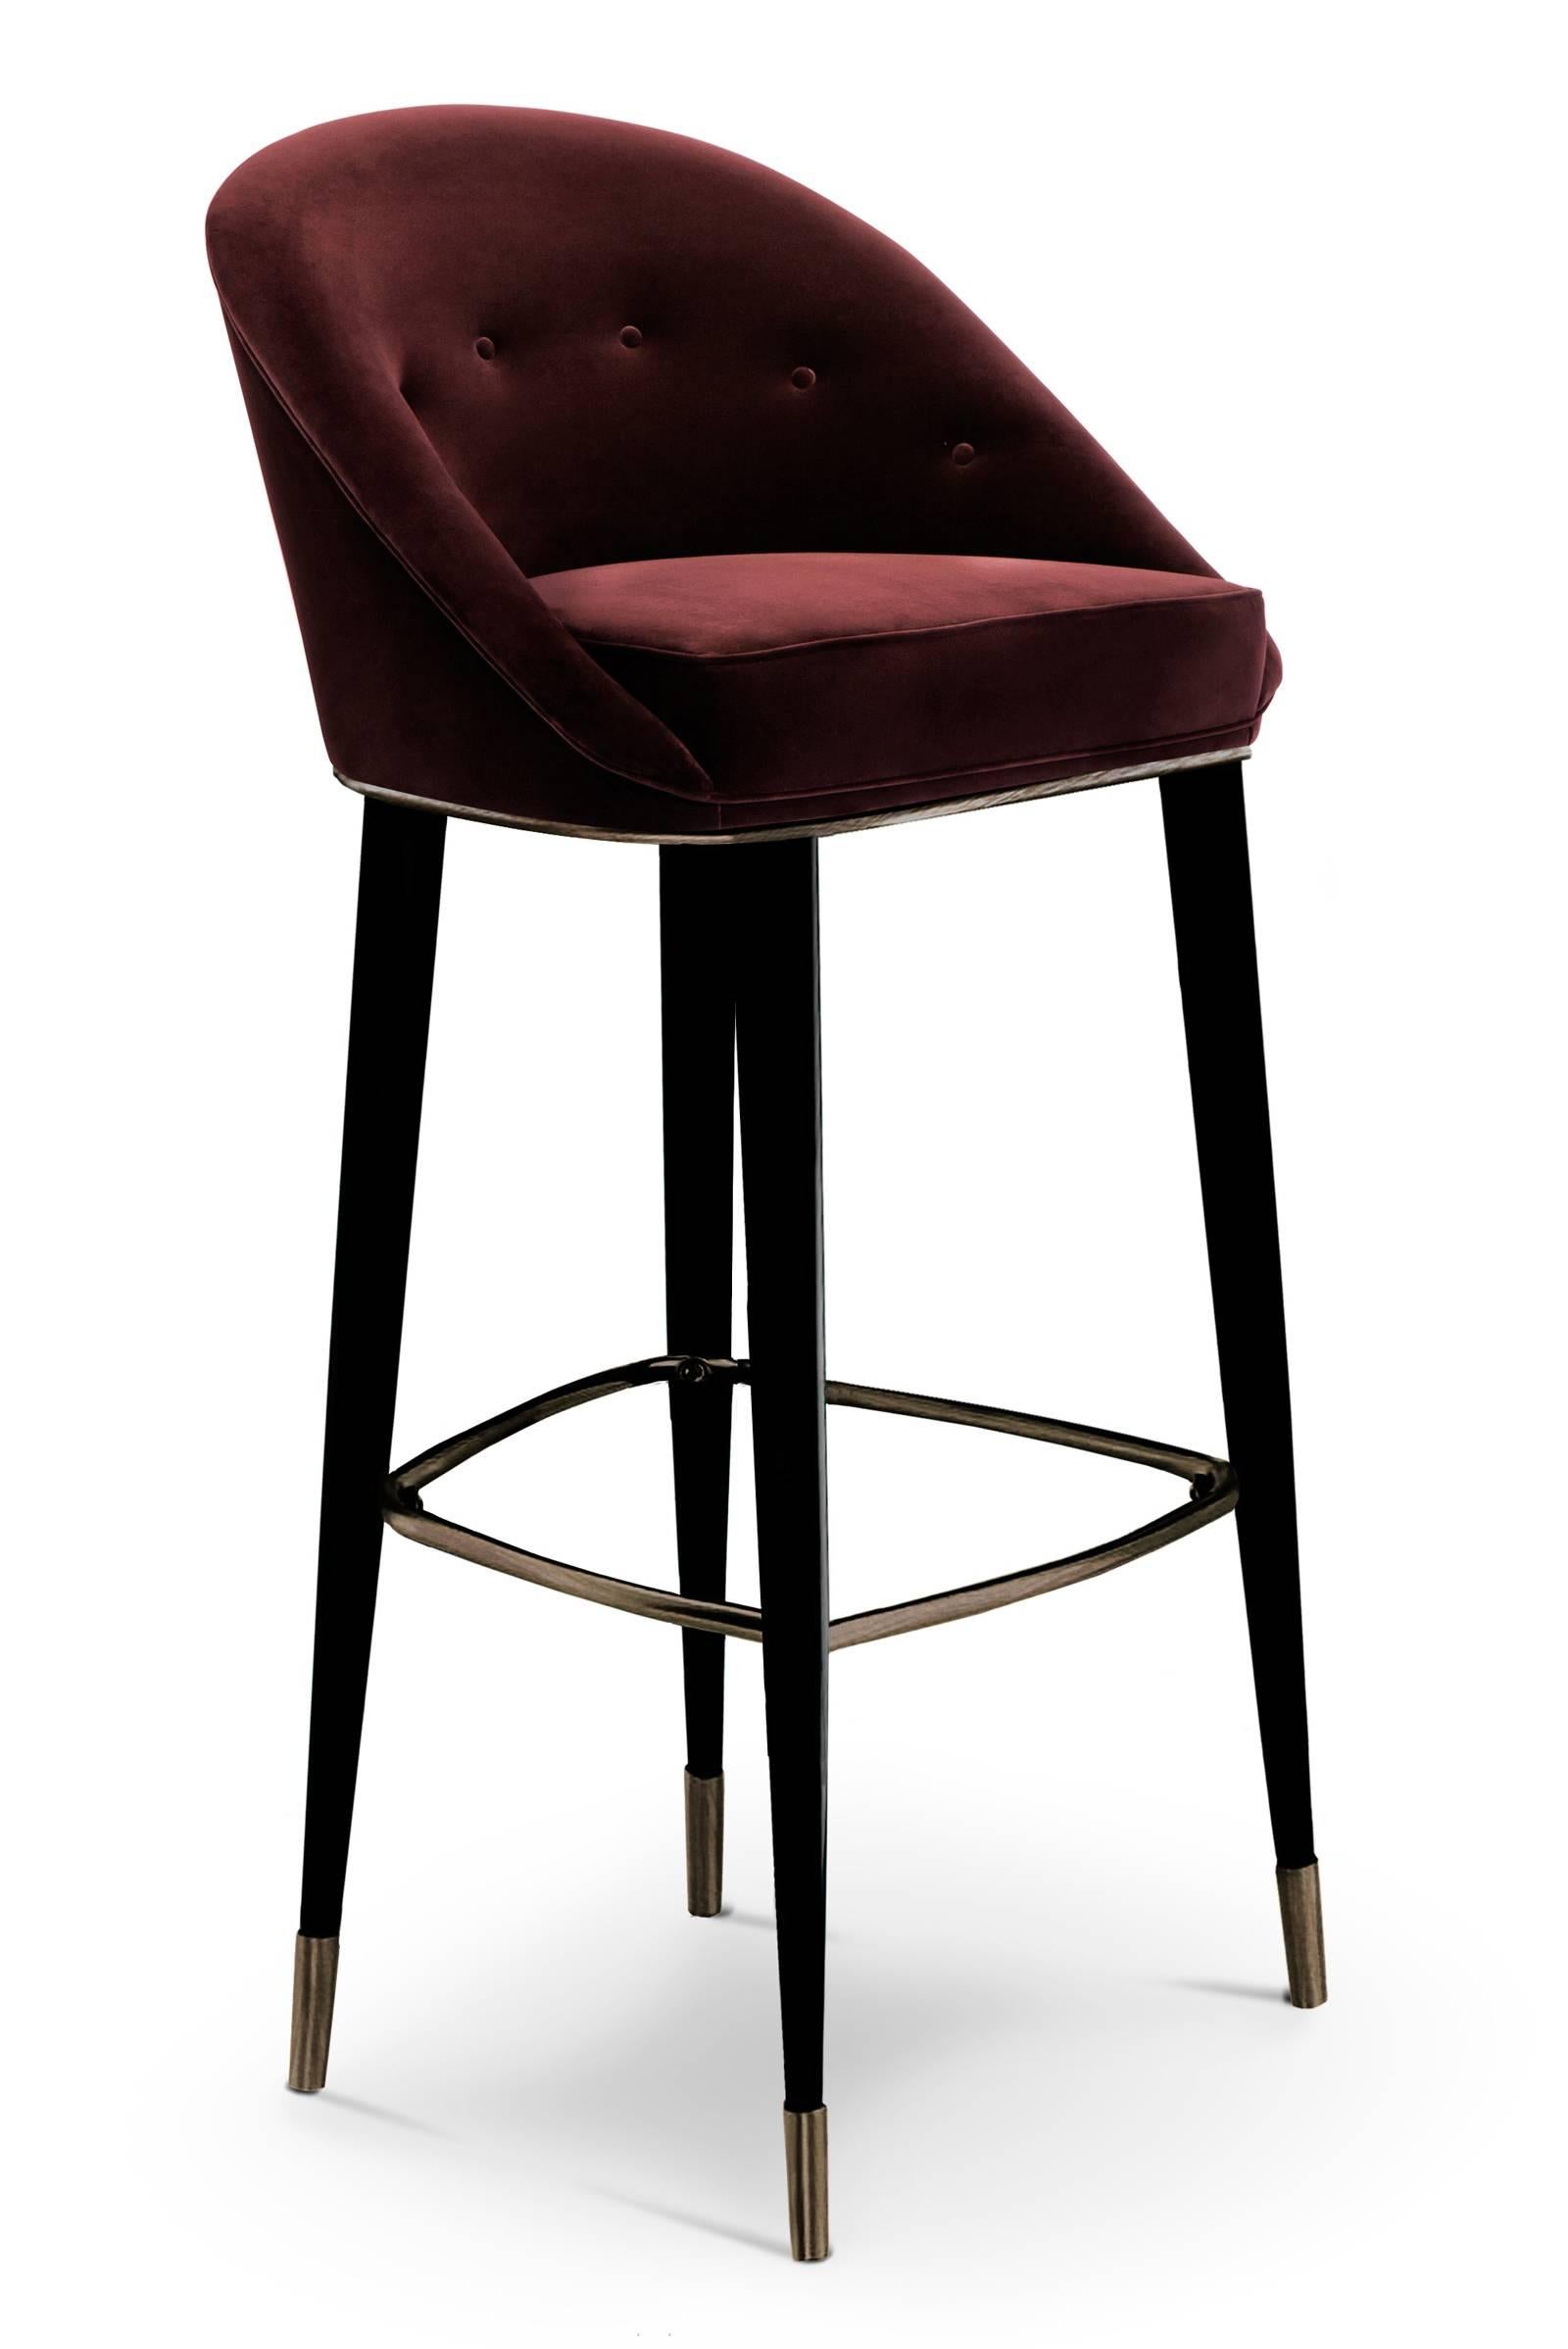 Bar stool Myla made with cotton velvet,
structure in black lacquered oak with aged brass details.
Available with custom's fabric.
